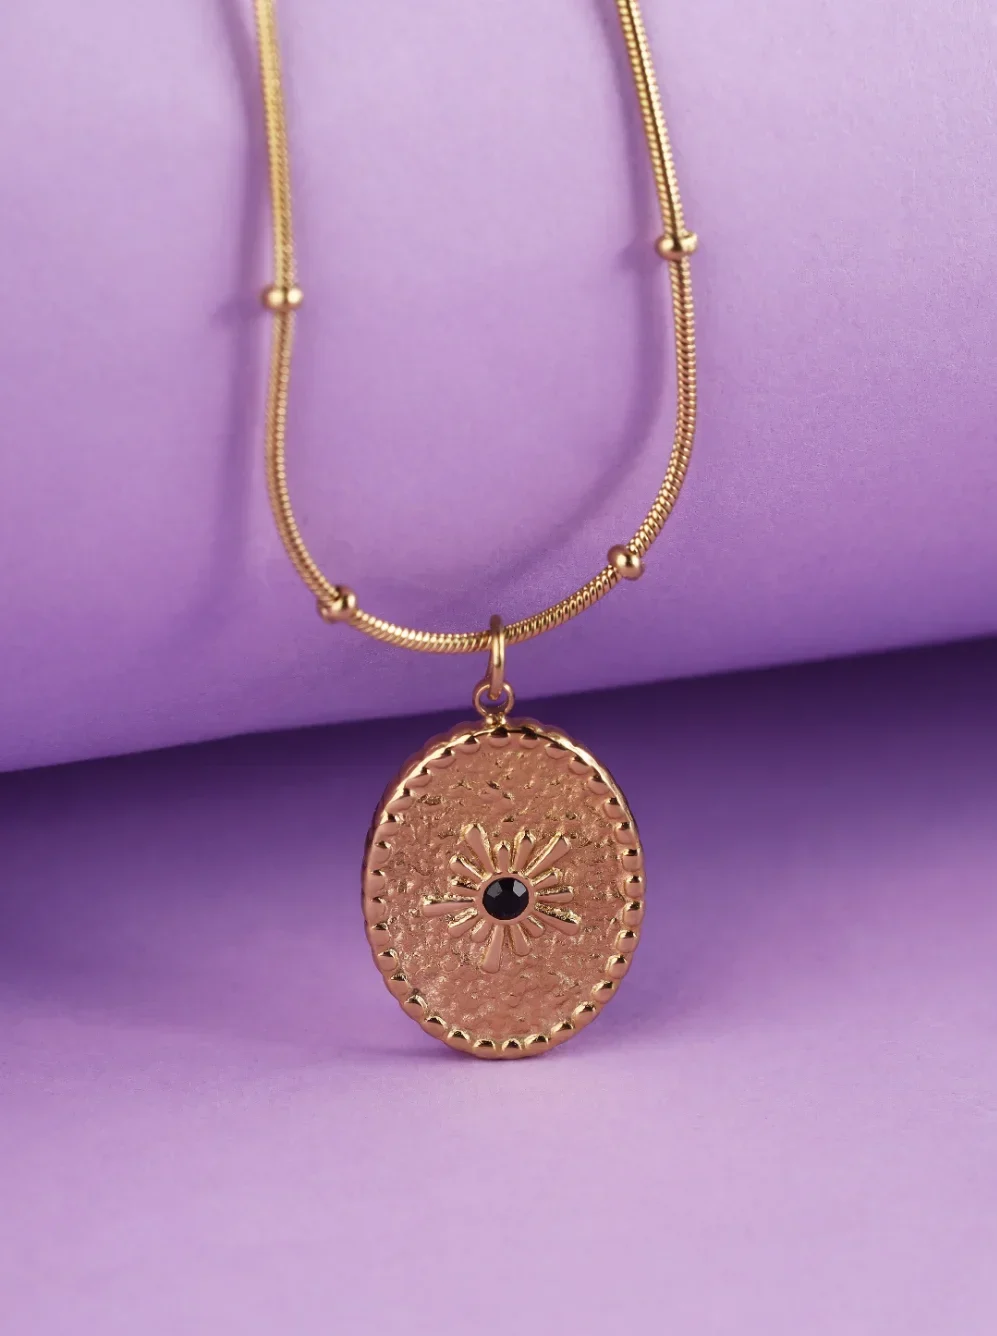 a gold necklace with a sun pendant on a purple background